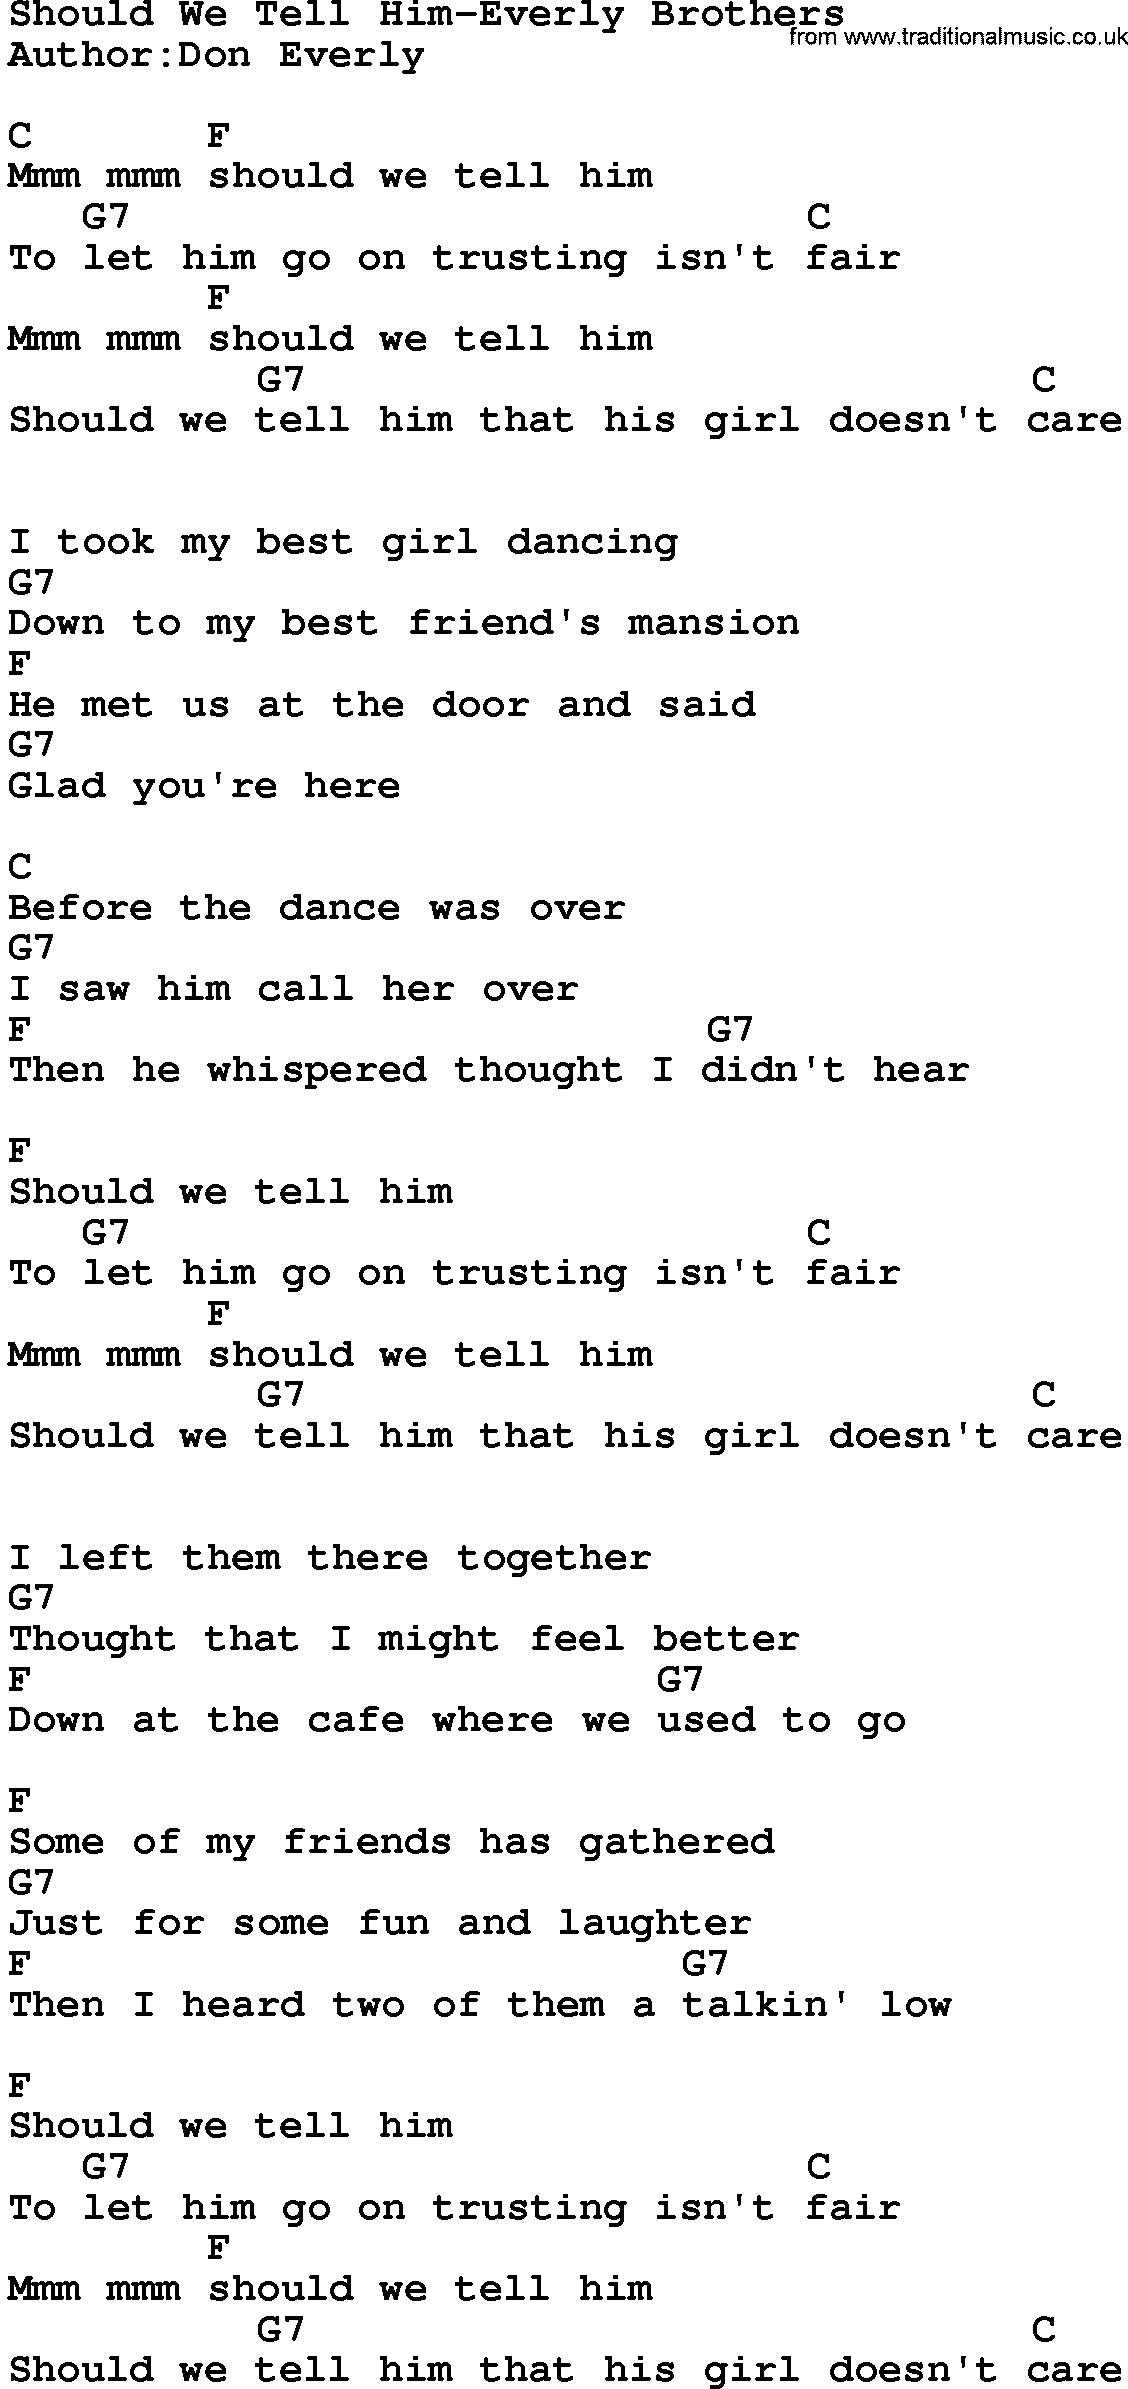 Country music song: Should We Tell Him-Everly Brothers lyrics and chords